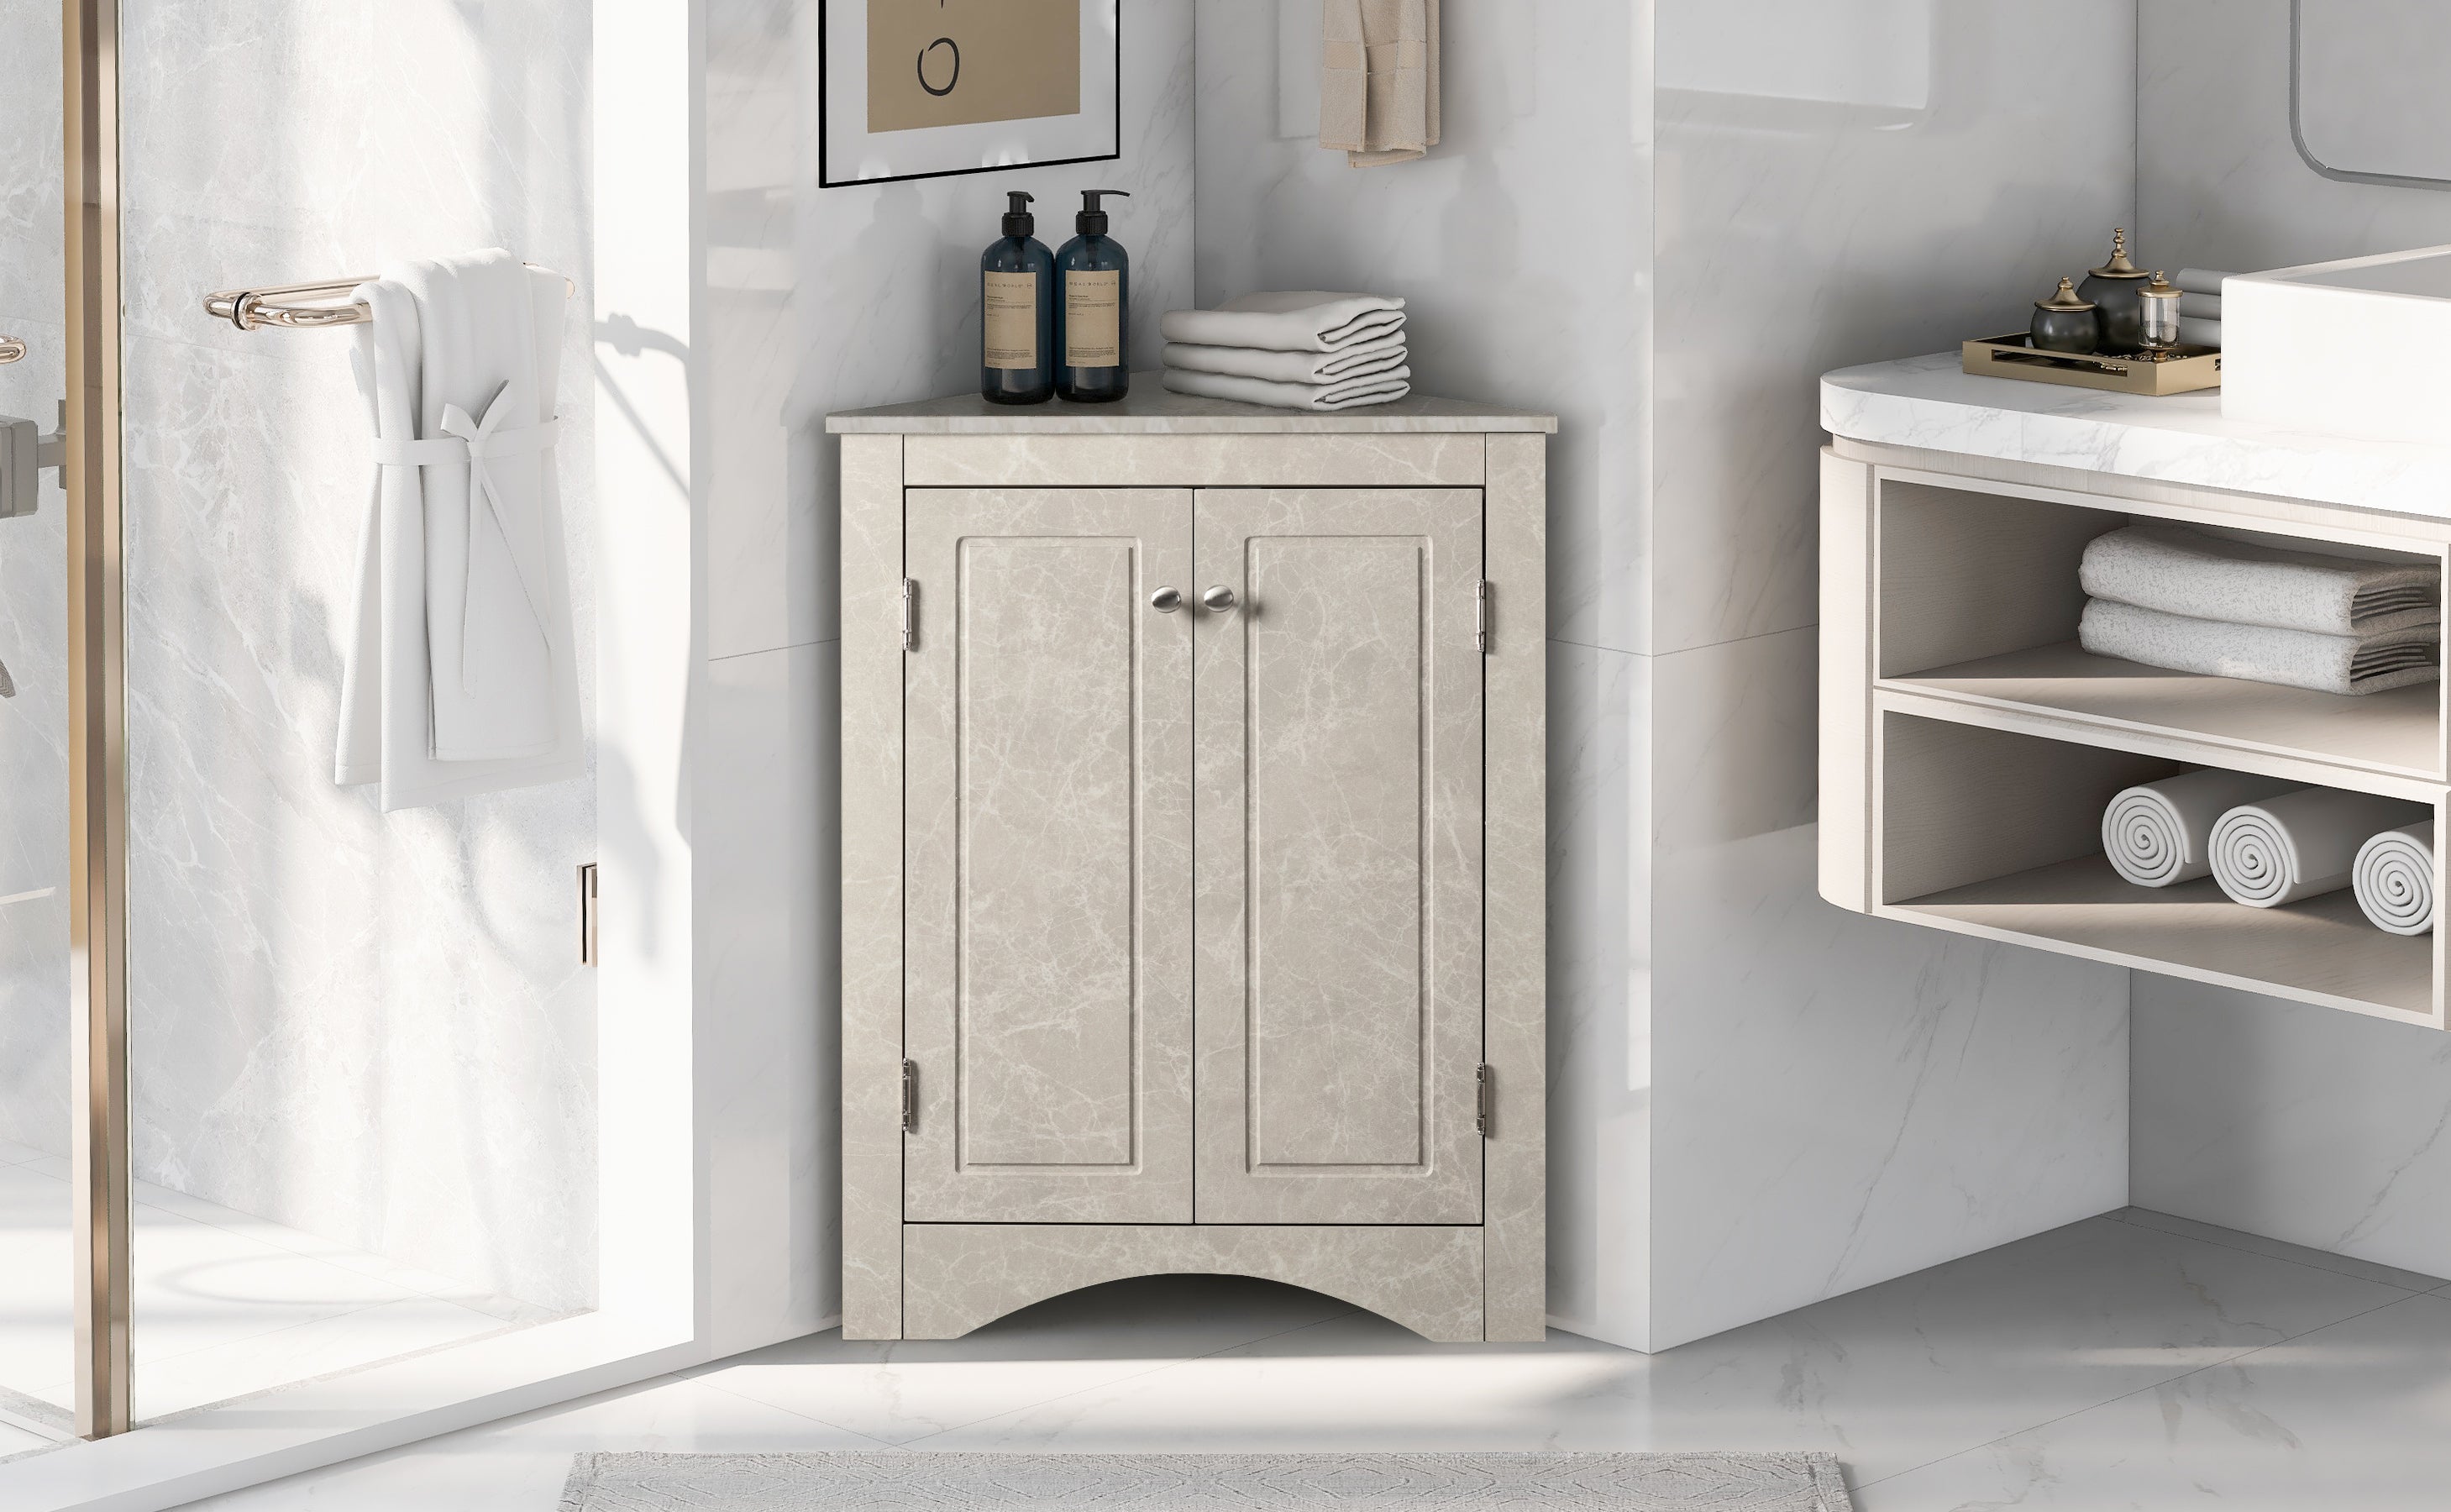 White Marble Triangle Bathroom Storage Cabinet with Adjustable Shelves